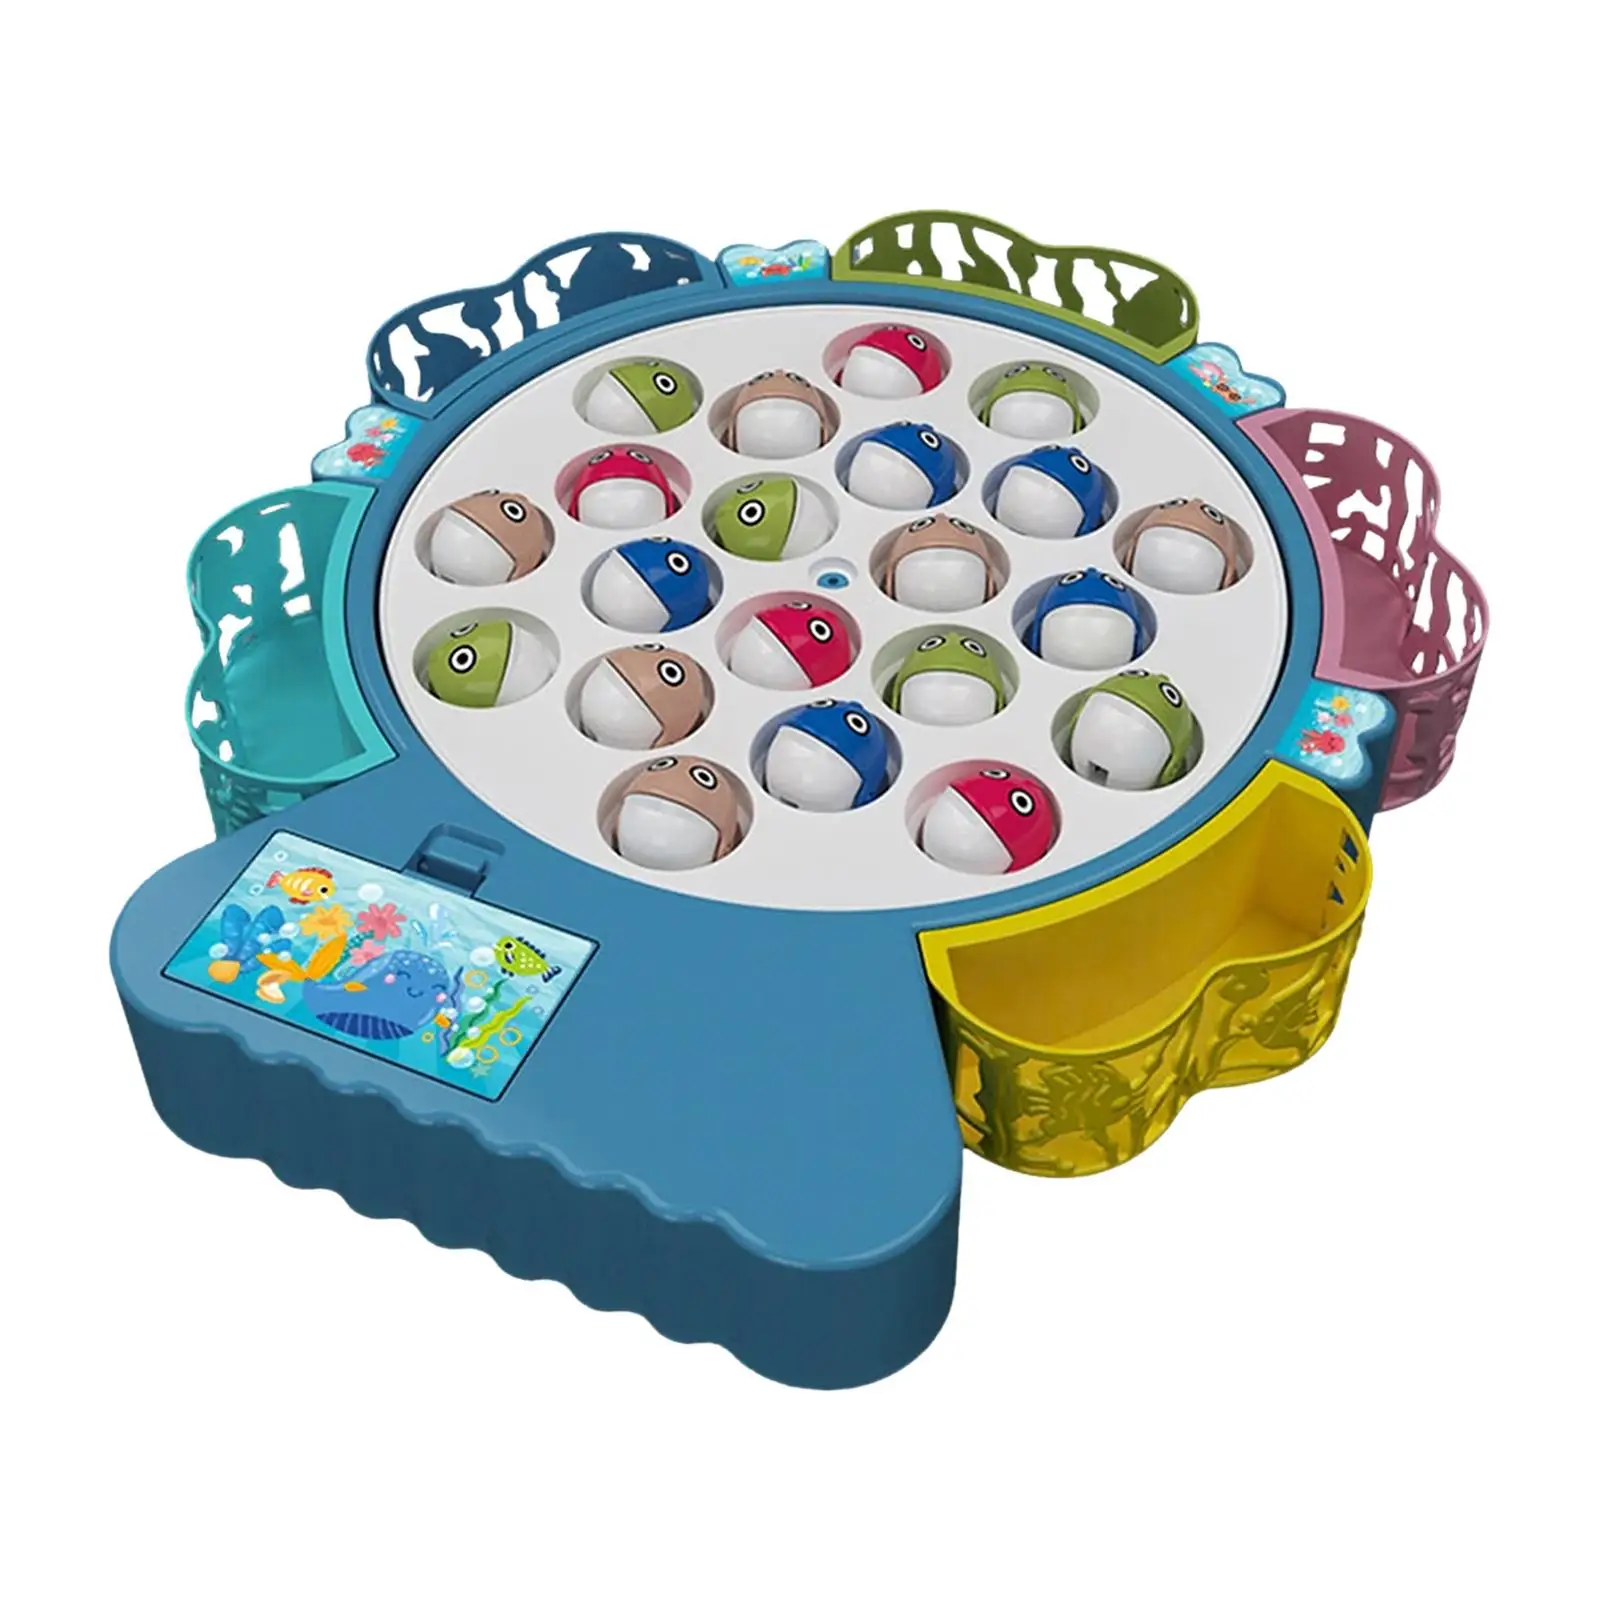 Rotating Fishing Game Educational Board Game Colorful Role Play Fine Motor Skills for Toddlers Backyards Family Kids Party Favor